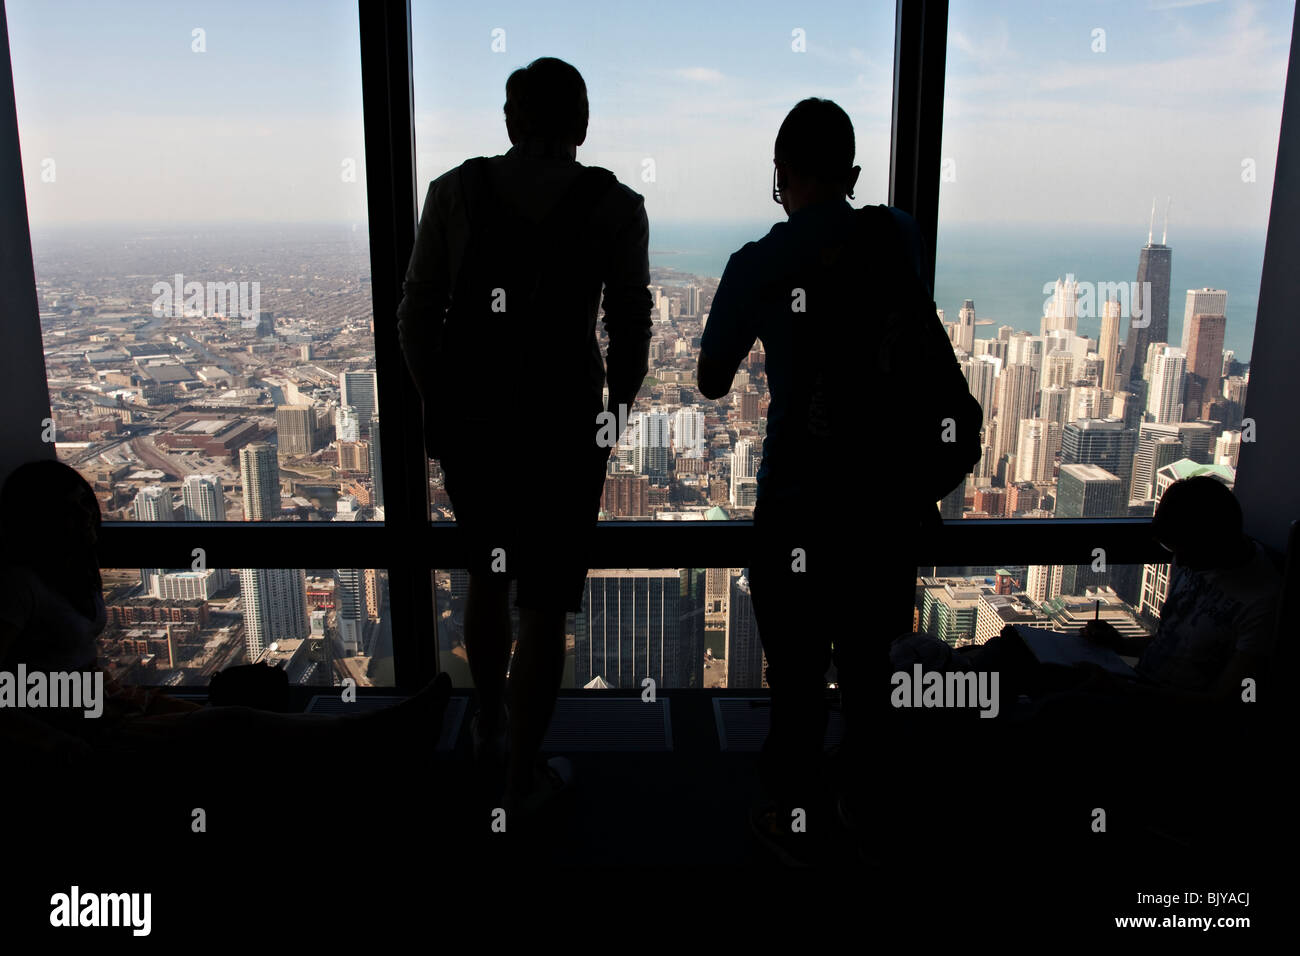 Observation deck (skydeck) on top of the Willis (former Sears) tower in Chicago, Illinois, USA Stock Photo